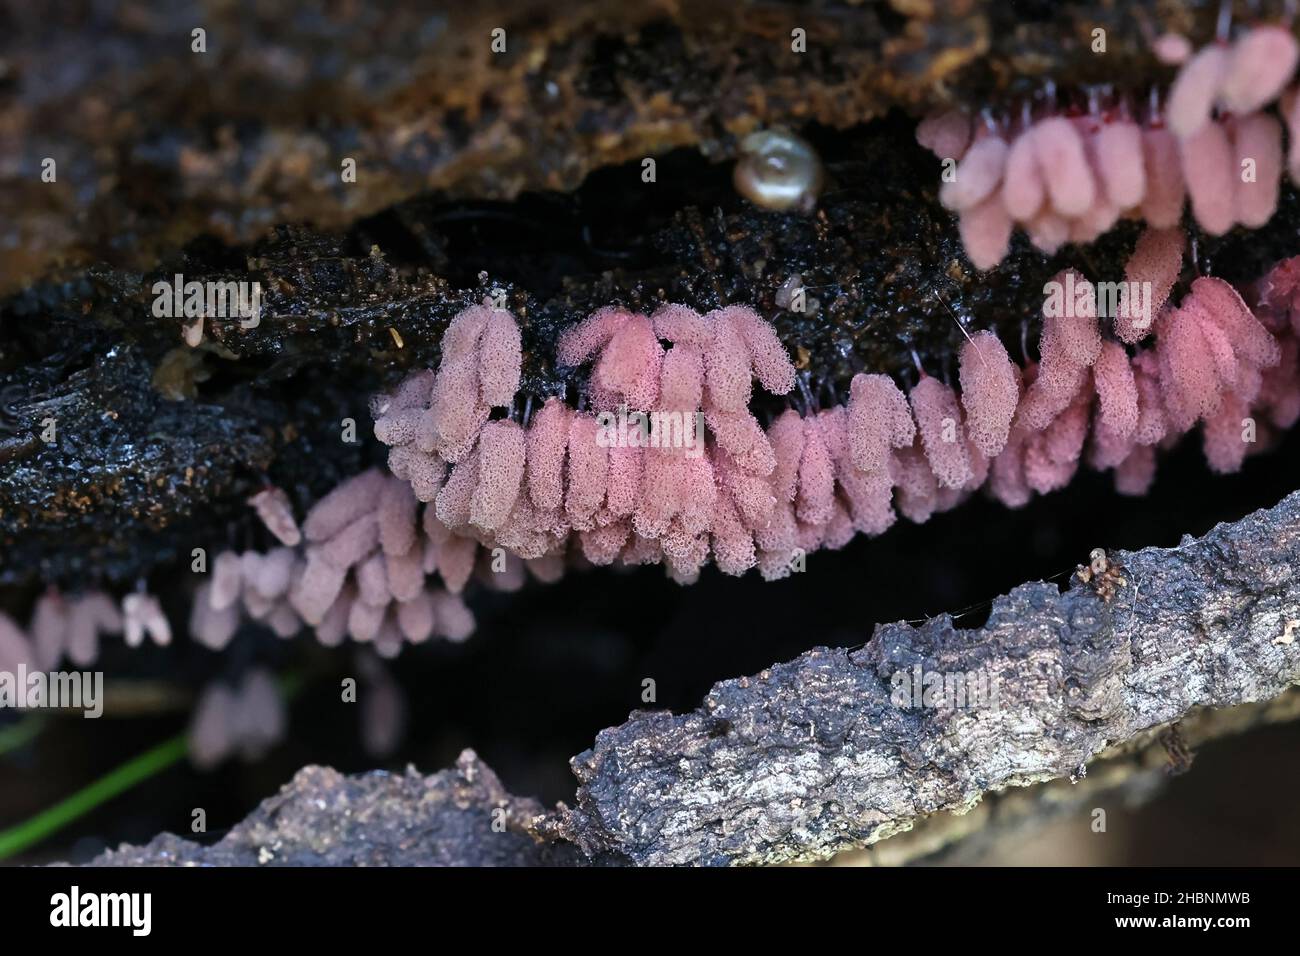 Acryria denudata, commonly known as Carnival candy slime mold Stock Photo